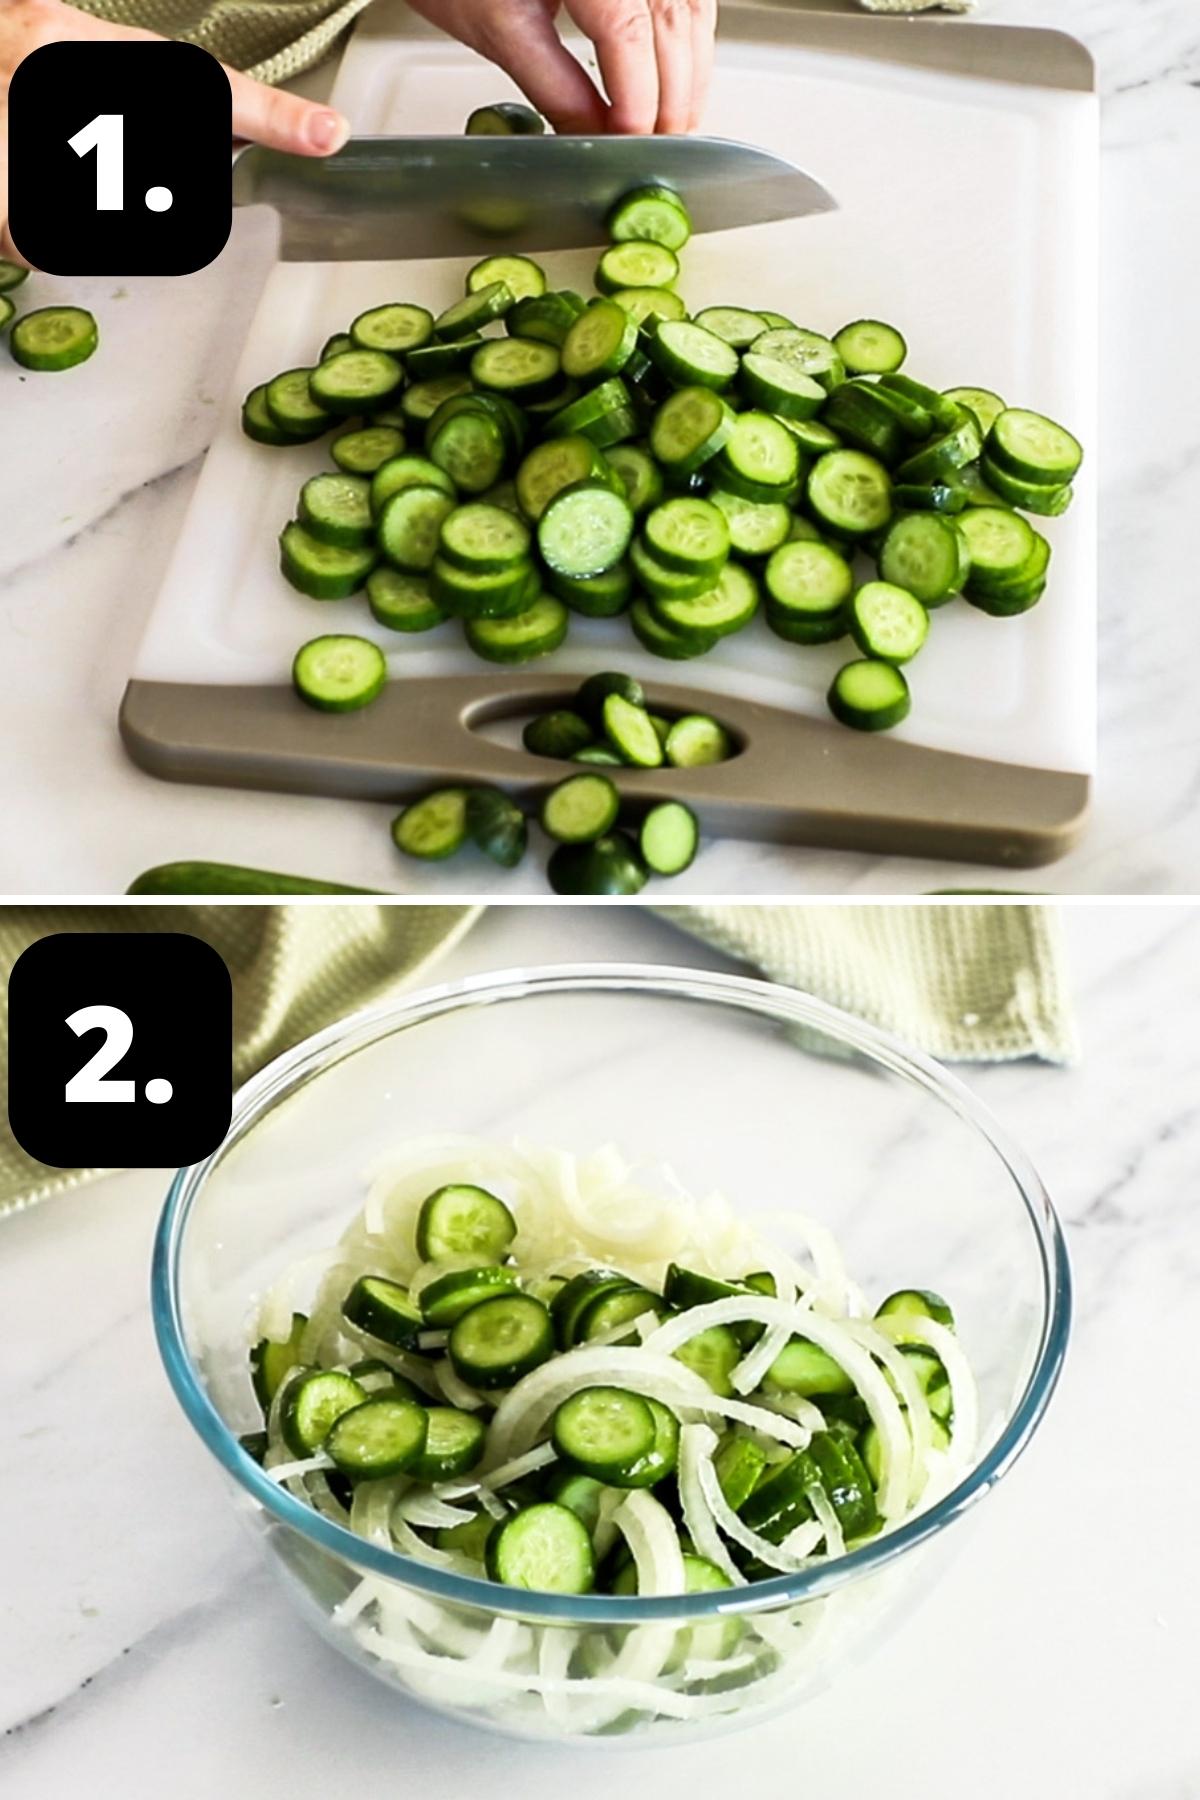 Steps 1-2 of preparing this recipe - slicing the cucumbers thinly, and the cucumber in a bowl along with the onion and salt.